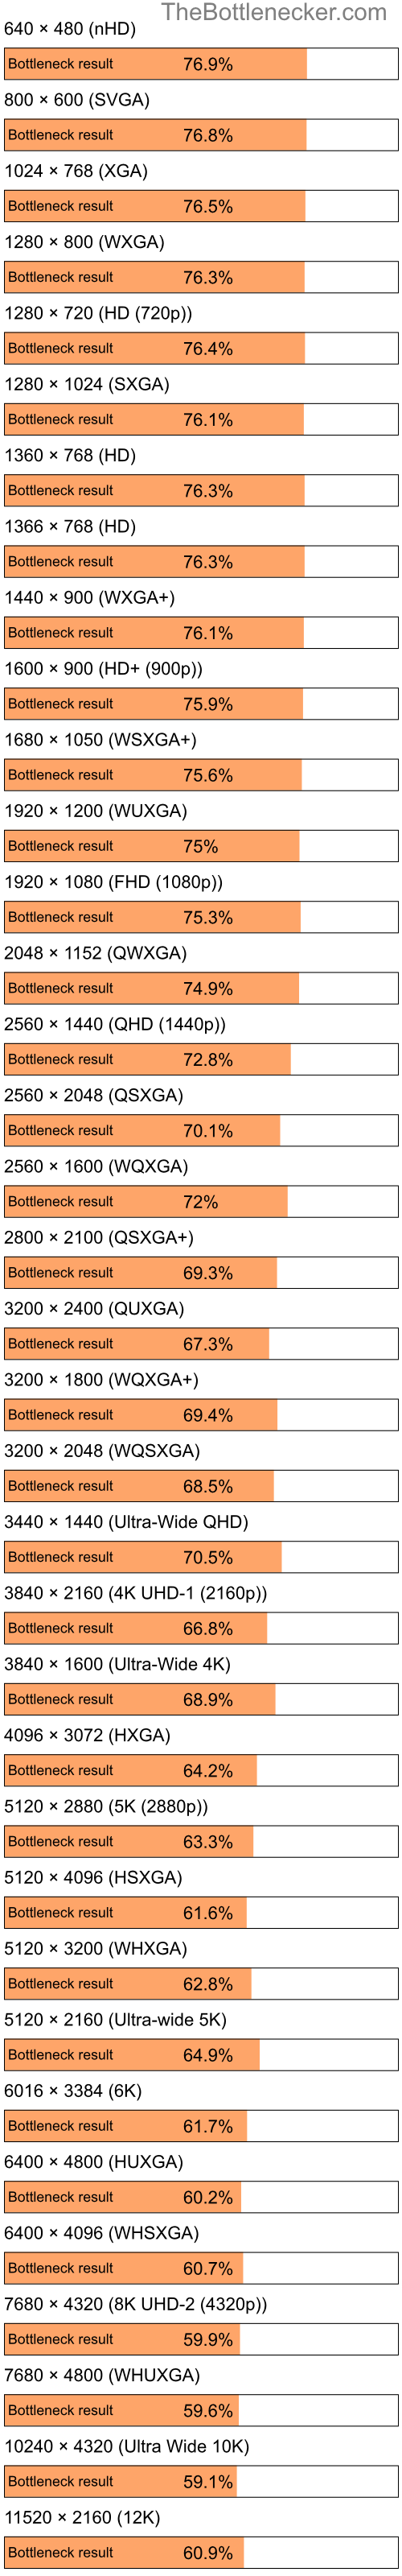 Bottleneck results by resolution for AMD Athlon 64 X2 5600+ and NVIDIA GeForce RTX 3070 in Graphic Card Intense Tasks